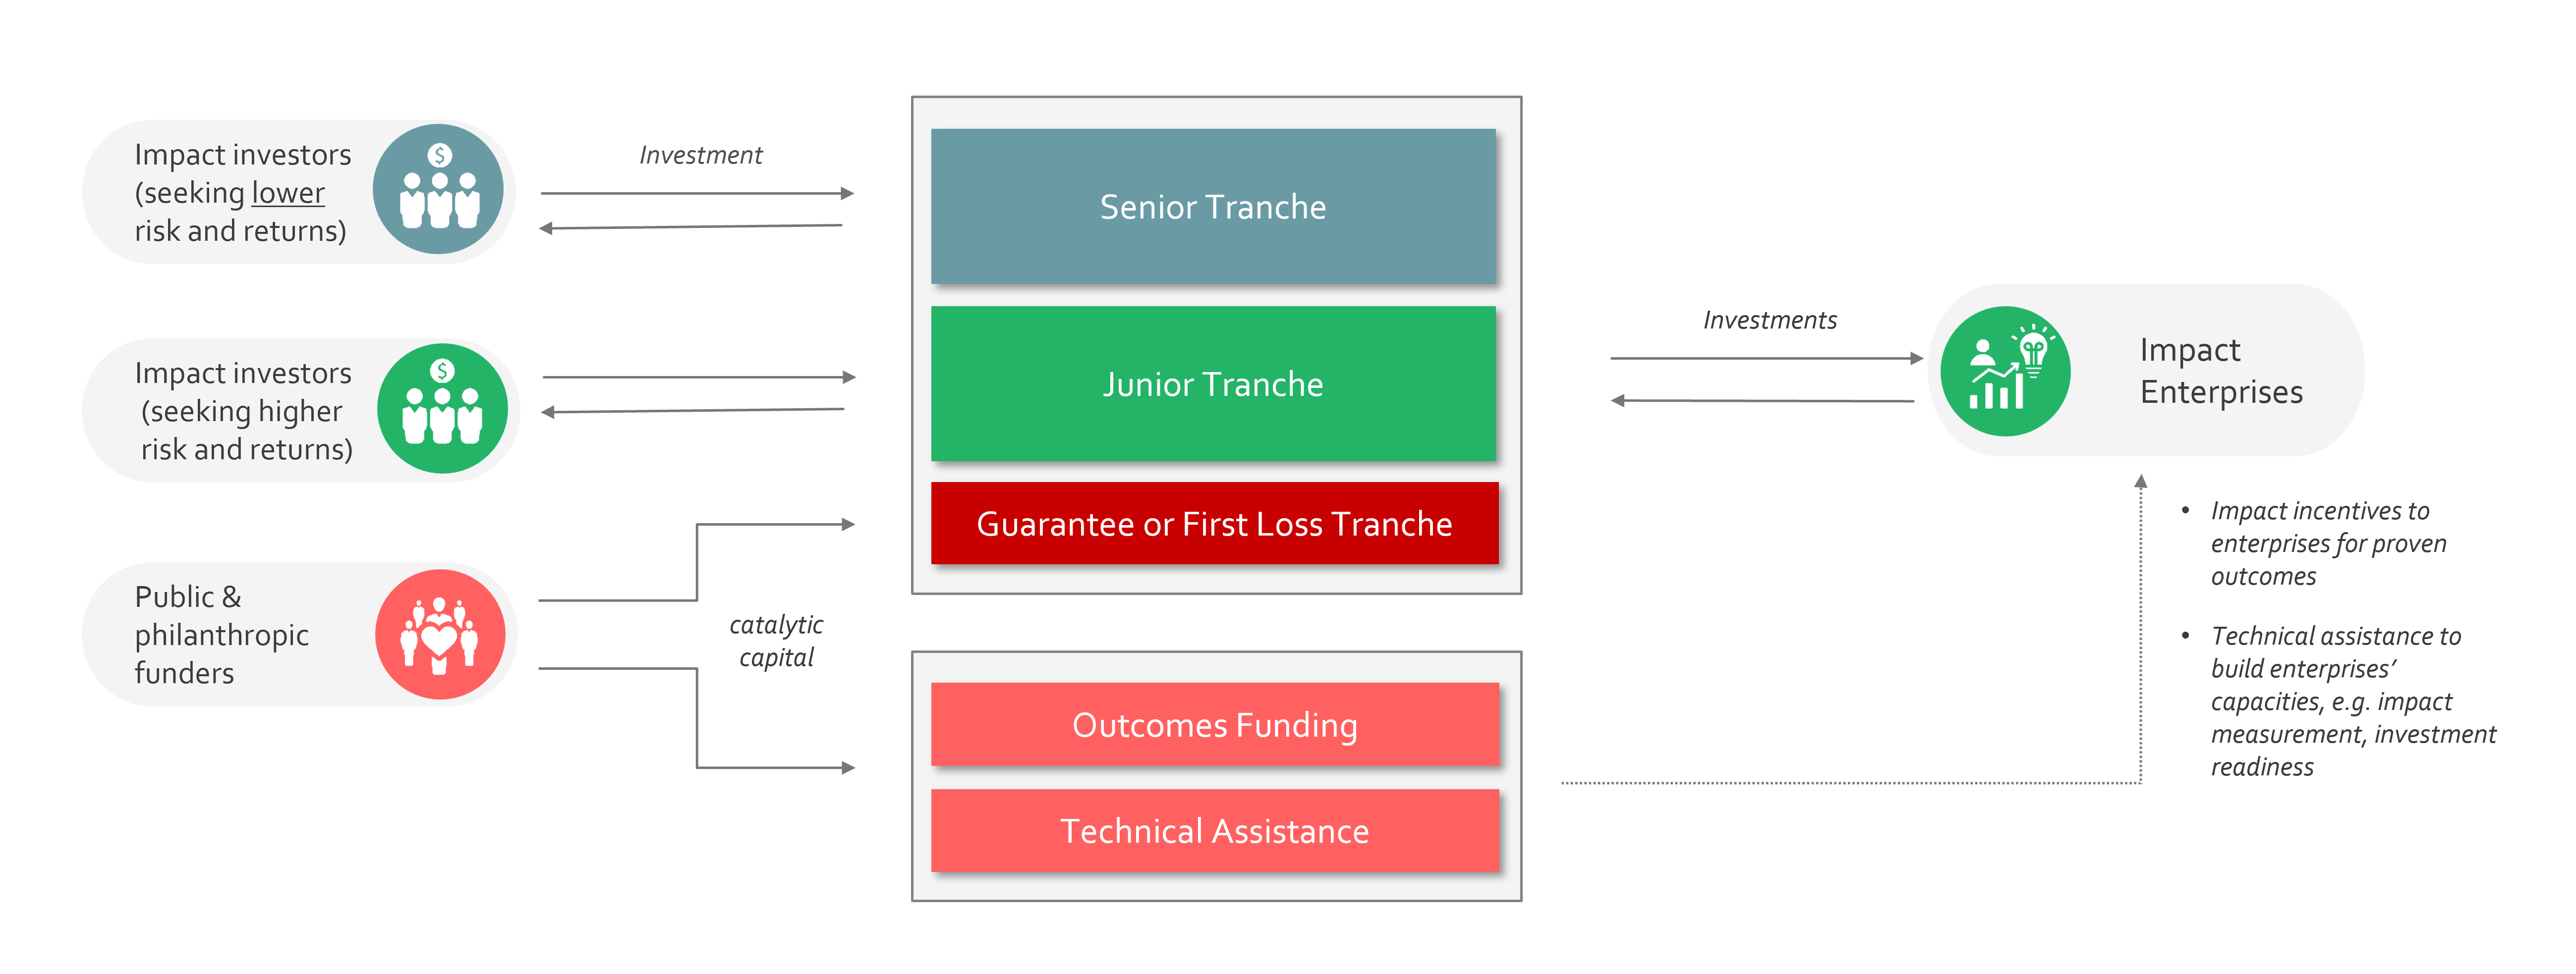 Blended funds with outcomes funding and technical assistance. Source: FASE/Roots of Impact.png